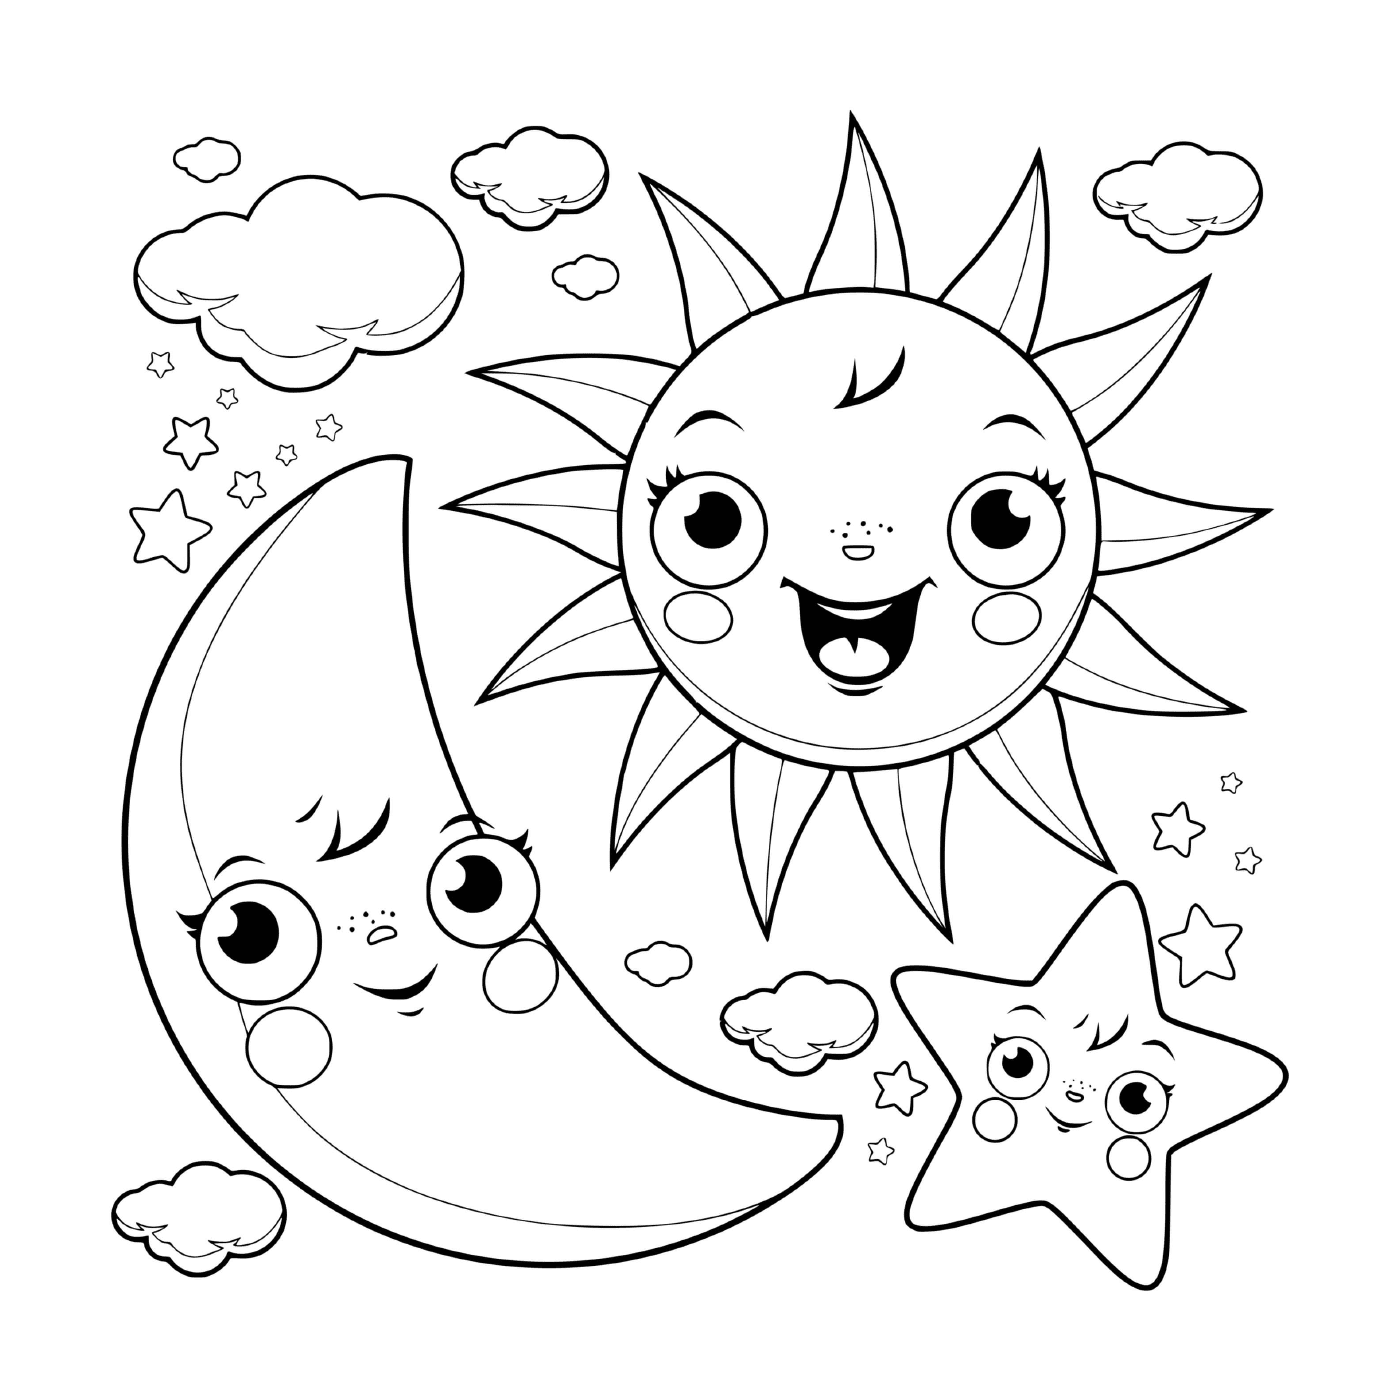  Sun, moon and star, clouds 